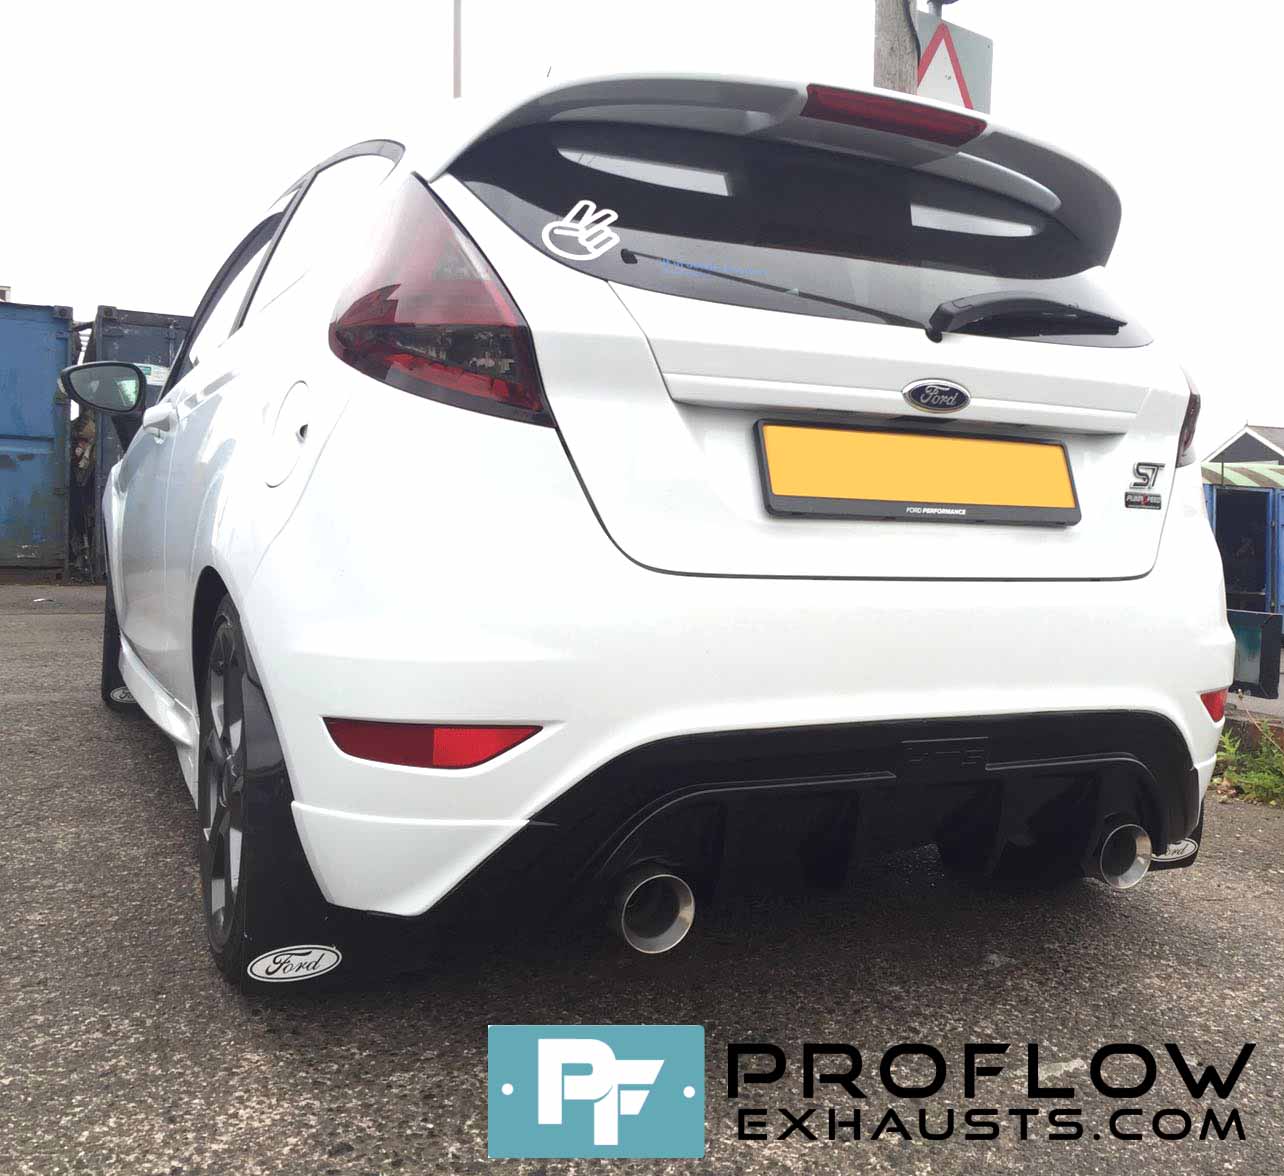 Proflow Custom Dual Tailpipes Rear Exhaust for Ford Fiesta ST